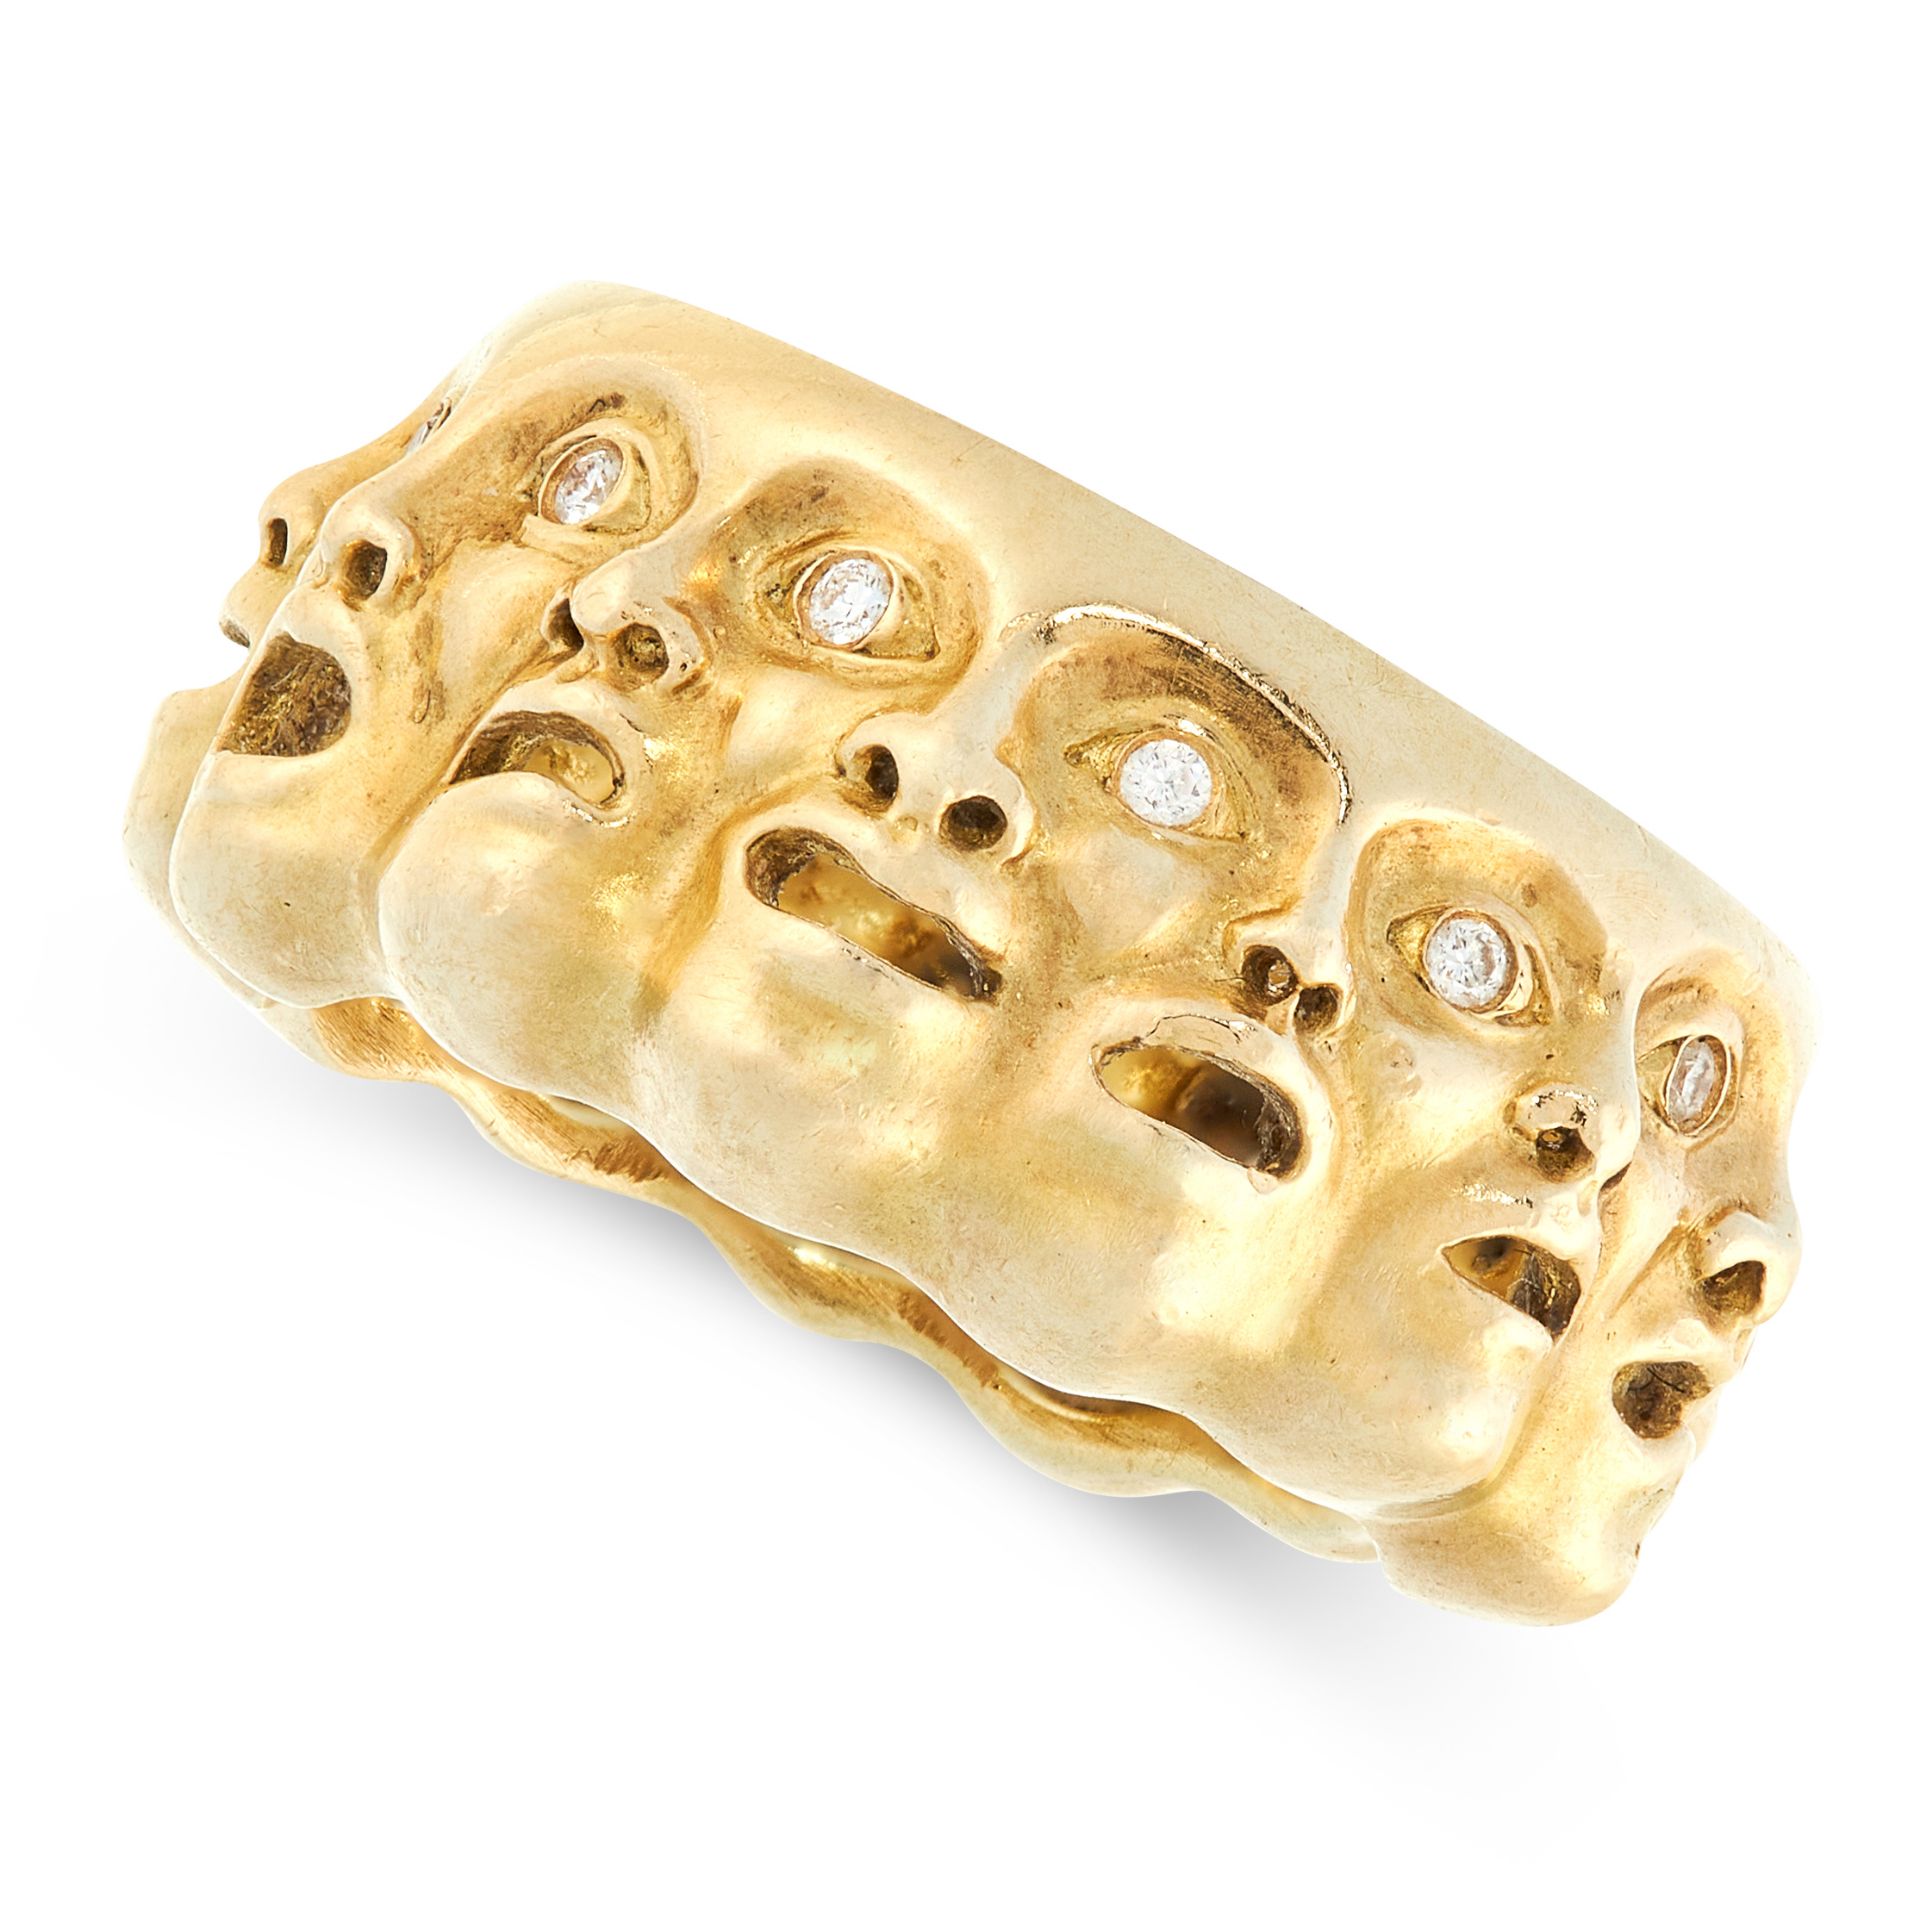 A VINTAGE DIAMOND DRESS RING in high carat yellow gold, formed of a row of theatrical mask faces set